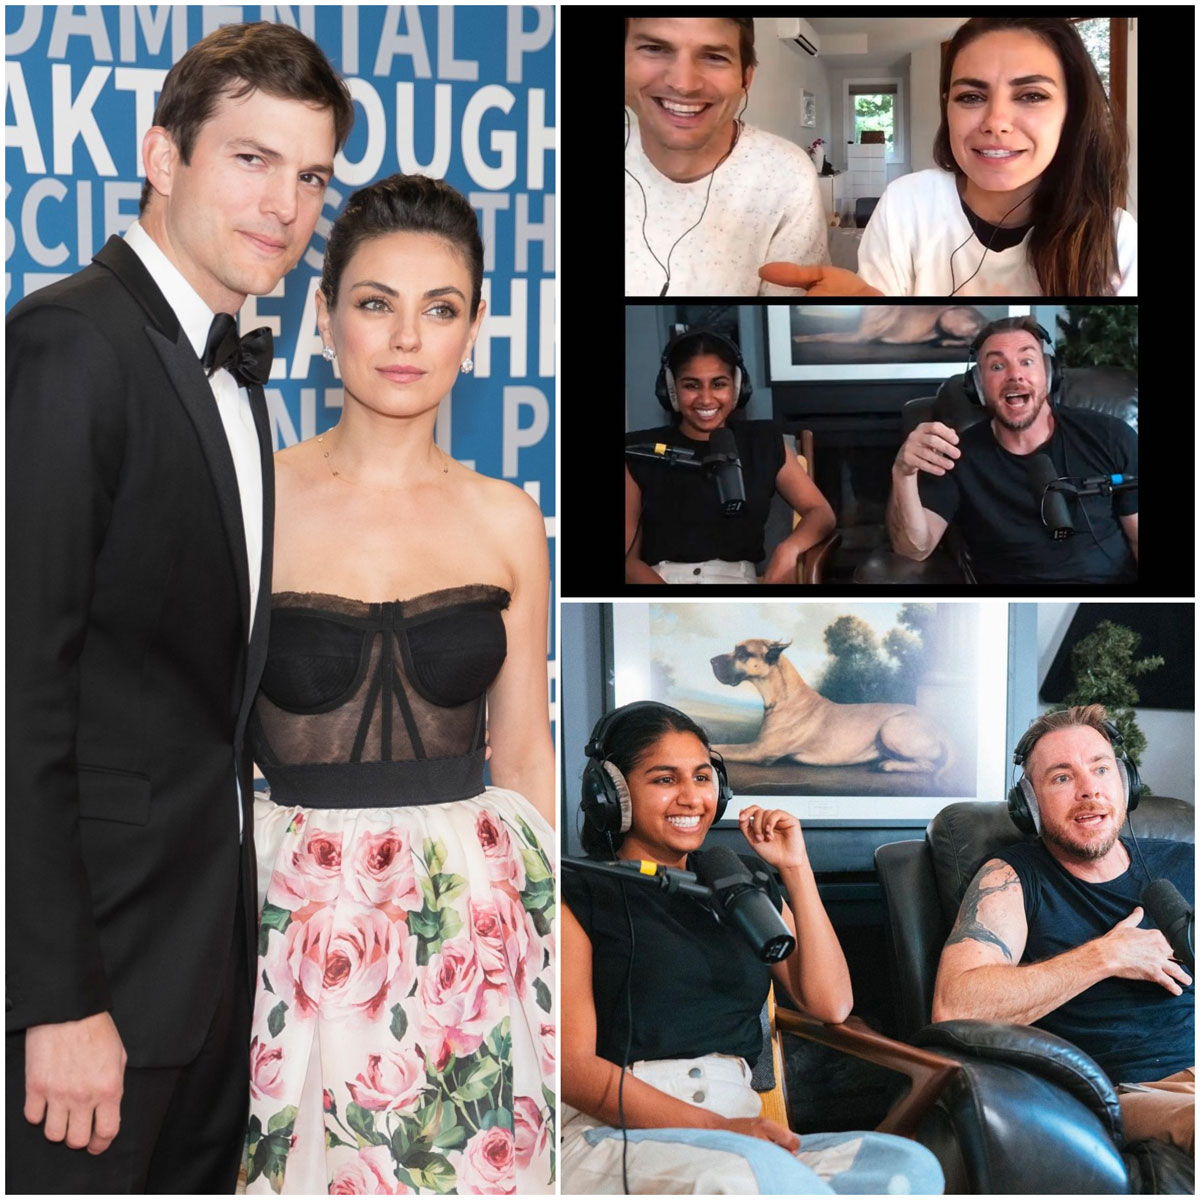  Mila Kunis and Dax Shepard on Dax's podcast